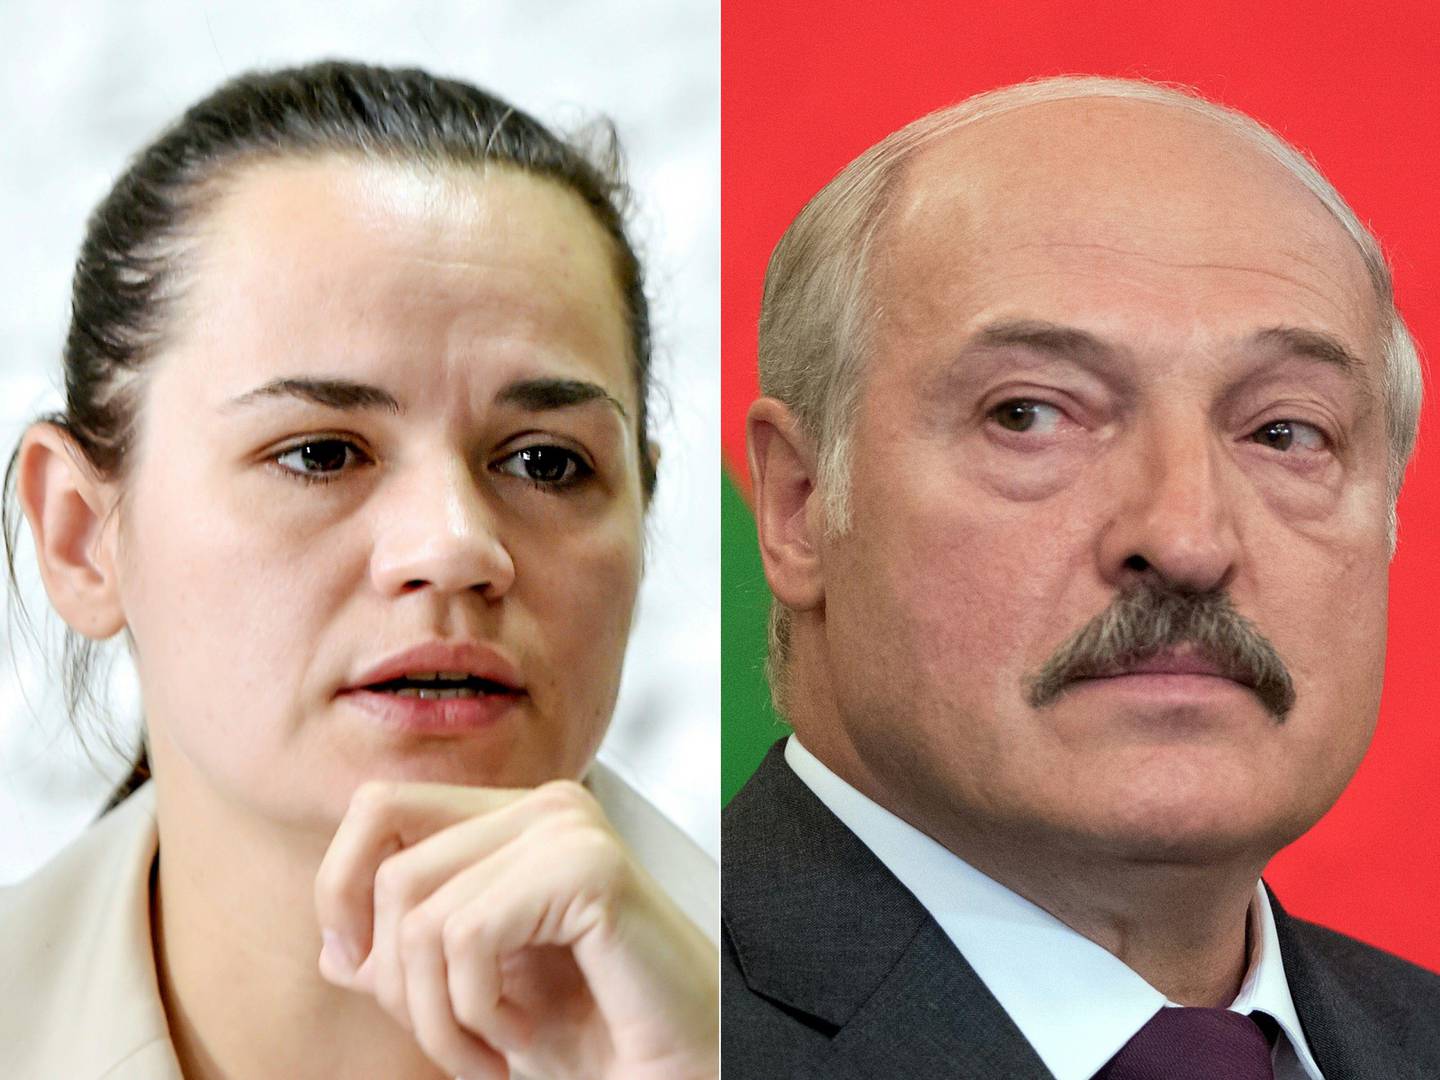 (COMBO) This combination of pictures created on August 17, 2020 shows presidential candidate Svetlana Tikhanovskaya (L) during a press conference the day after Belarus' presidential election in Minsk on August 10, 2020 and Belarus' President Alexander Lukashenko during a meeting with his Russian counterpart at the Kremlin in Moscow on June 30, 2017. - The main challenger in Belarus's disputed presidential election said on August 17, 2020 that she was ready to take over the country's leadership after a wave of protests against President Alexander Lukashenko. (Photos by Sergei GAPON and Sergei GUNEYEV / various sources / AFP)